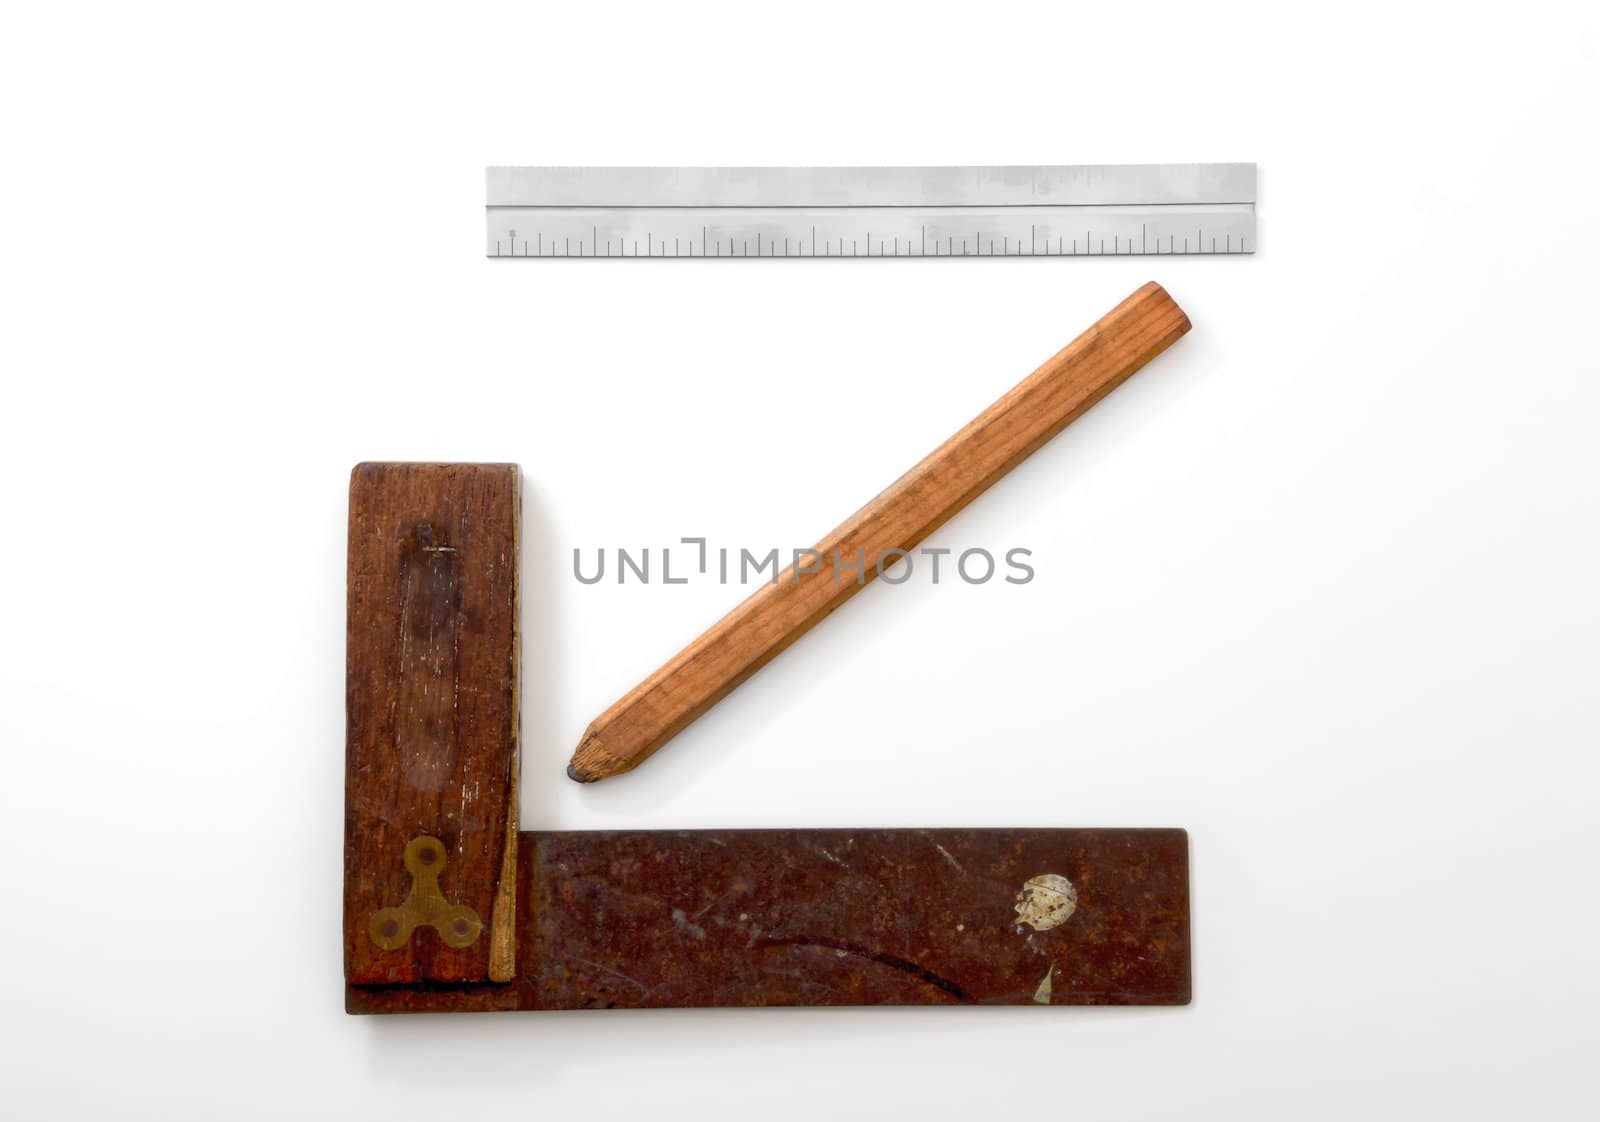 Square Pencil and Ruler by wolterk